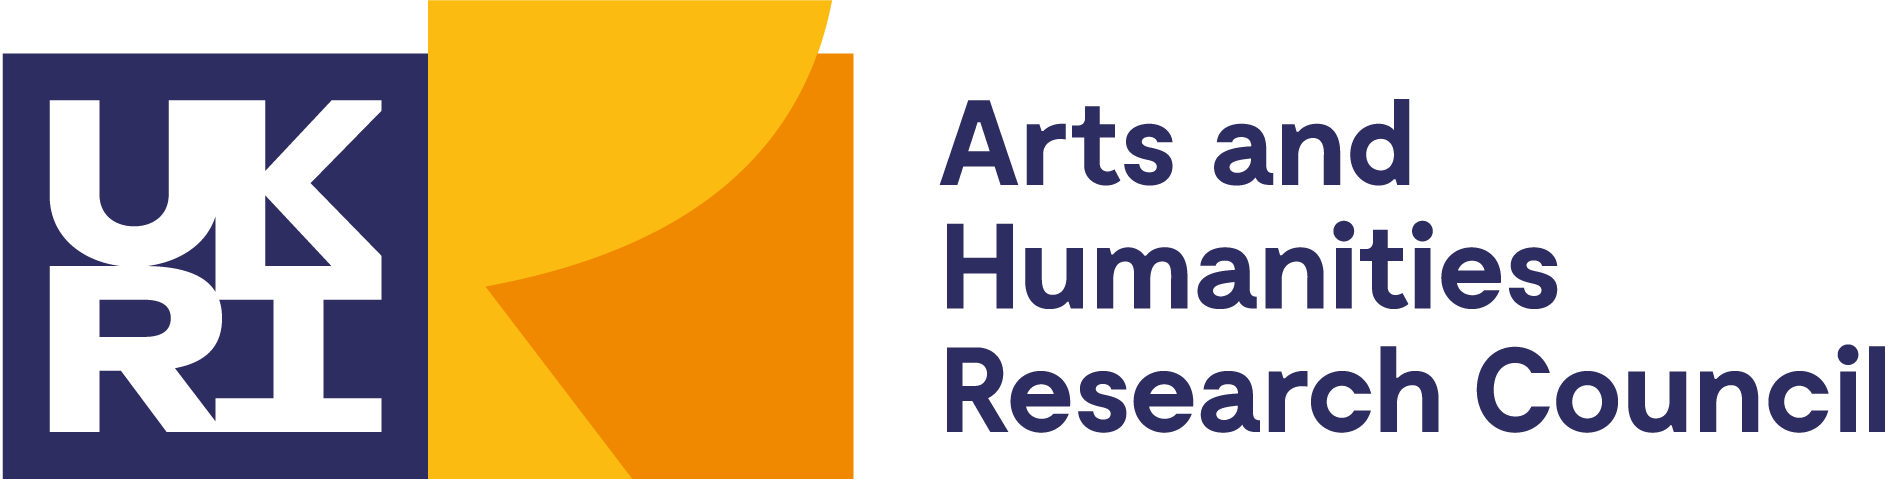 The AHRC logo, saying 'UKRI' on the left in white with a purple background, and Arts and Humanities Research Council in purple on the right